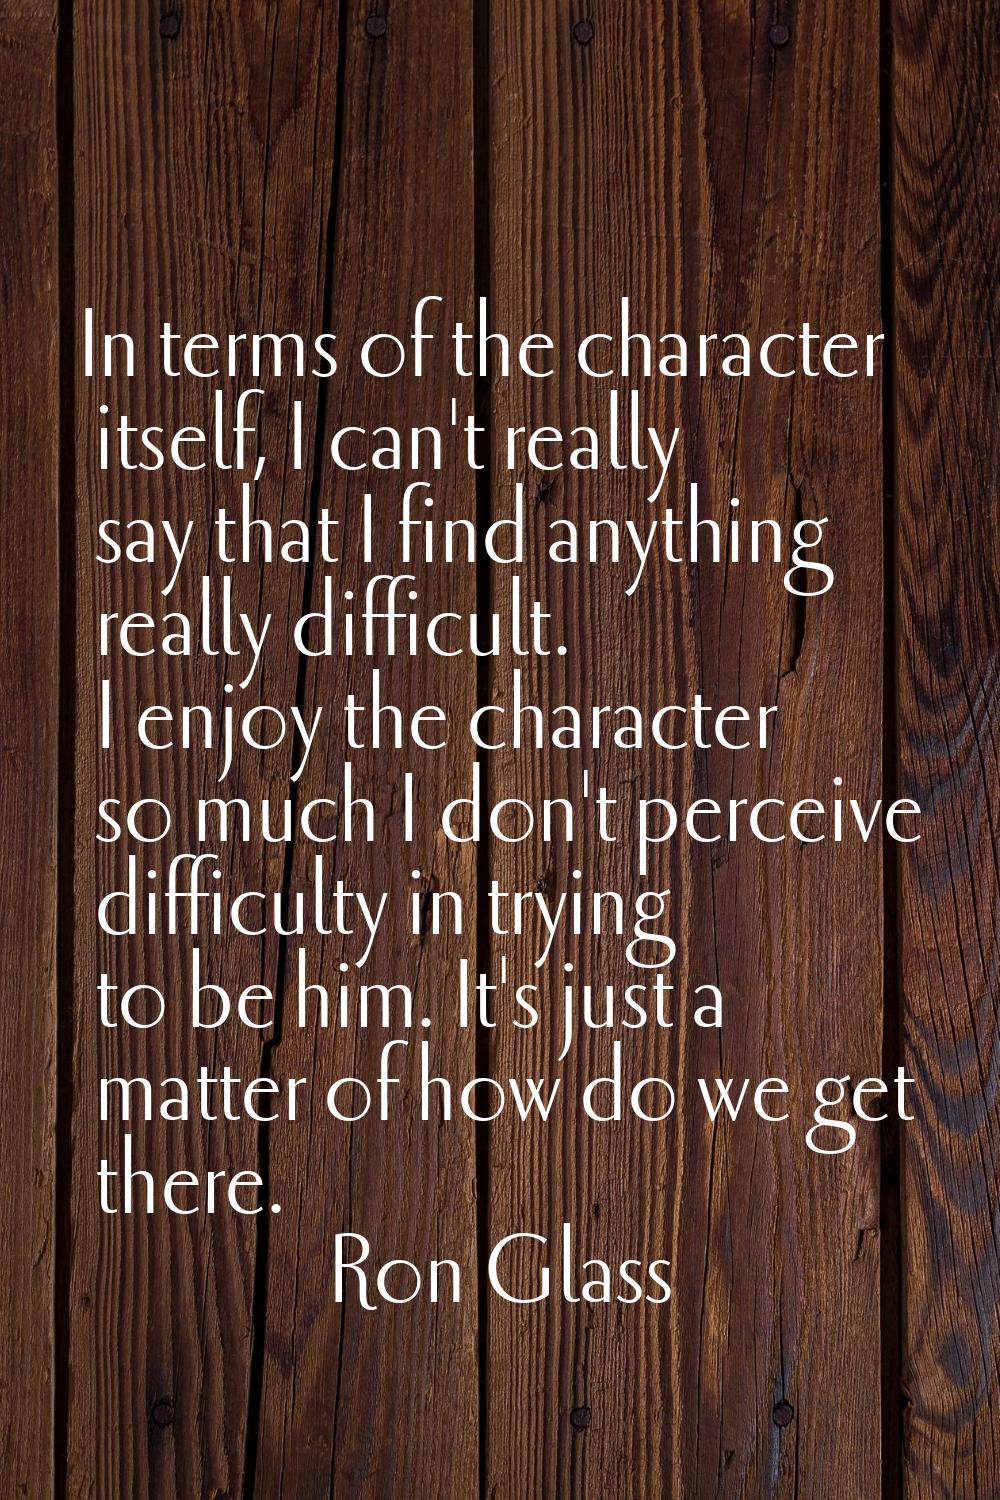 In terms of the character itself, I can't really say that I find anything really difficult. I enjoy